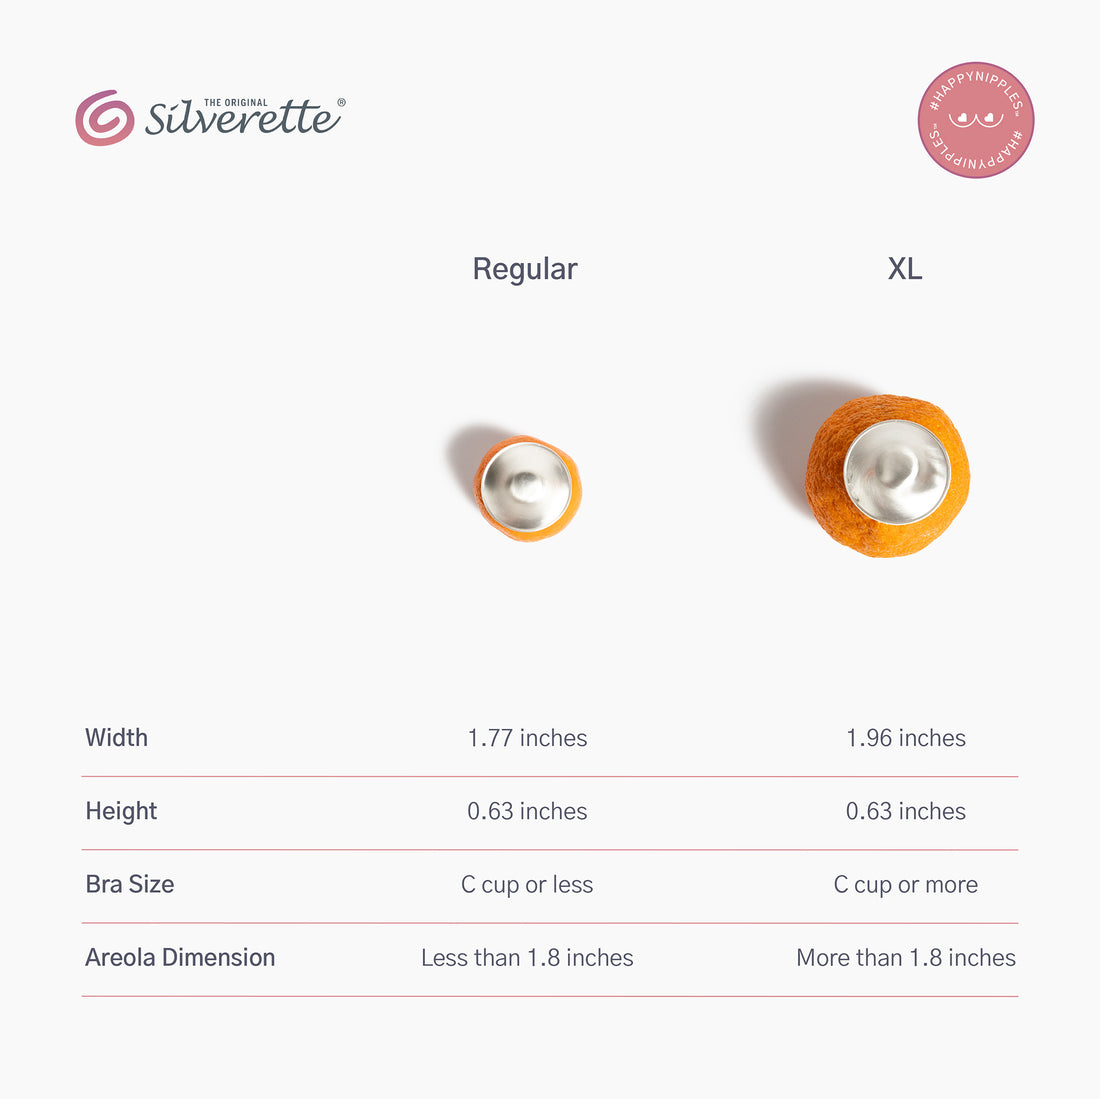 All about the Silverette Nursing Cups – SavvyMamaSG